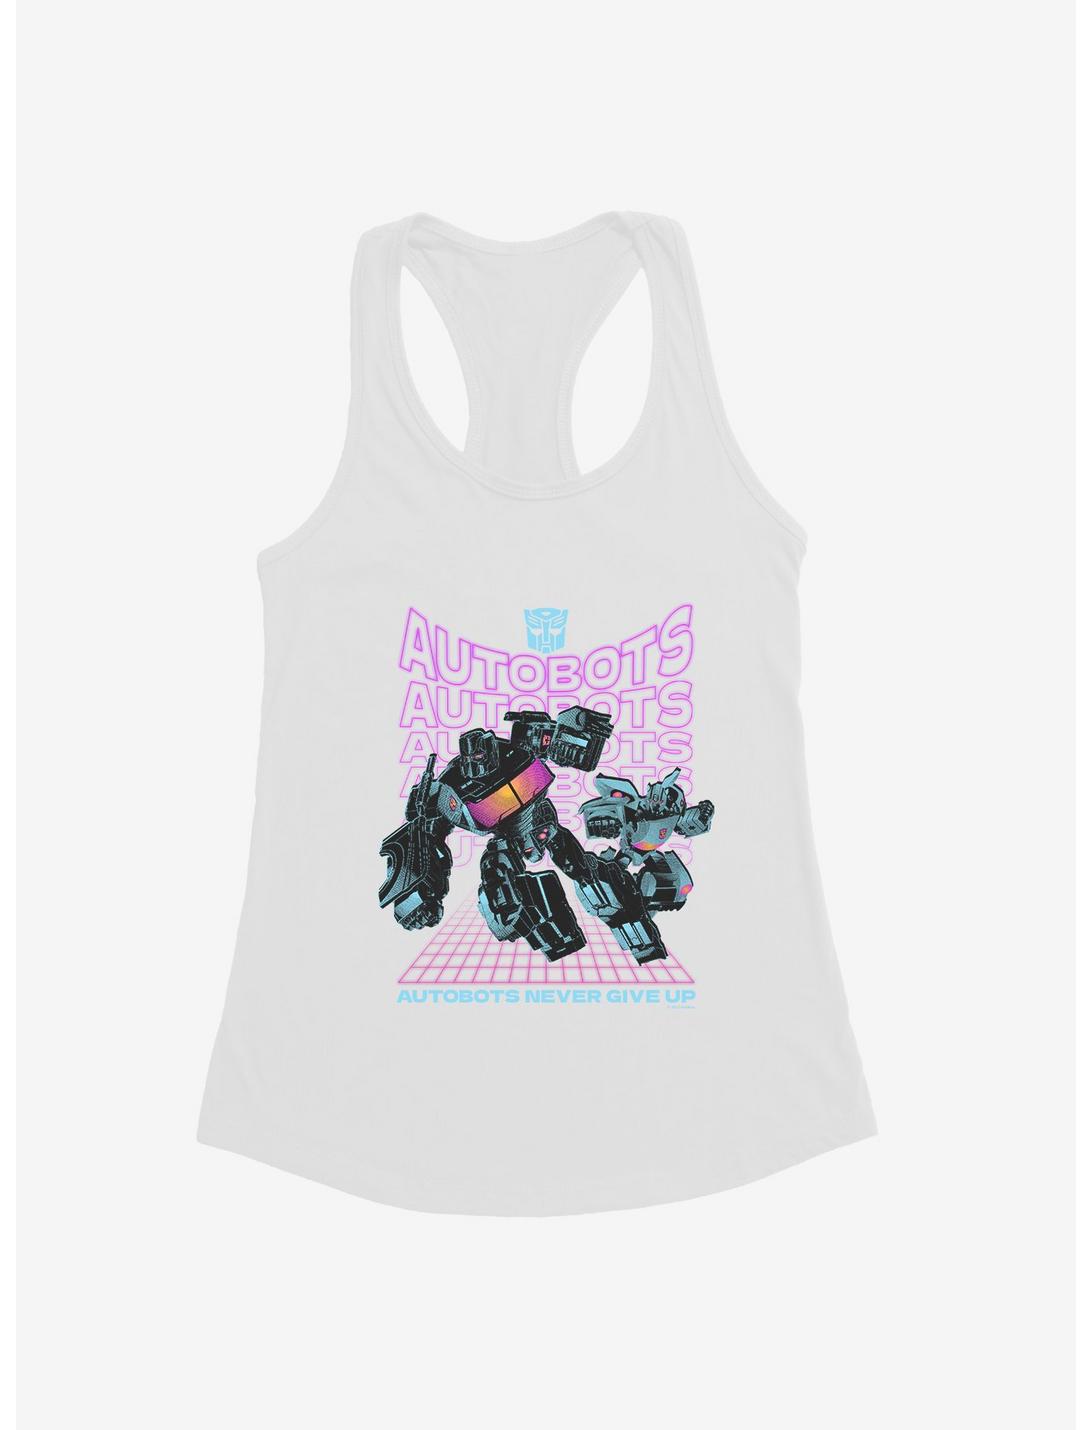 Transformers Autobots Never Give Up Girls Tank, , hi-res